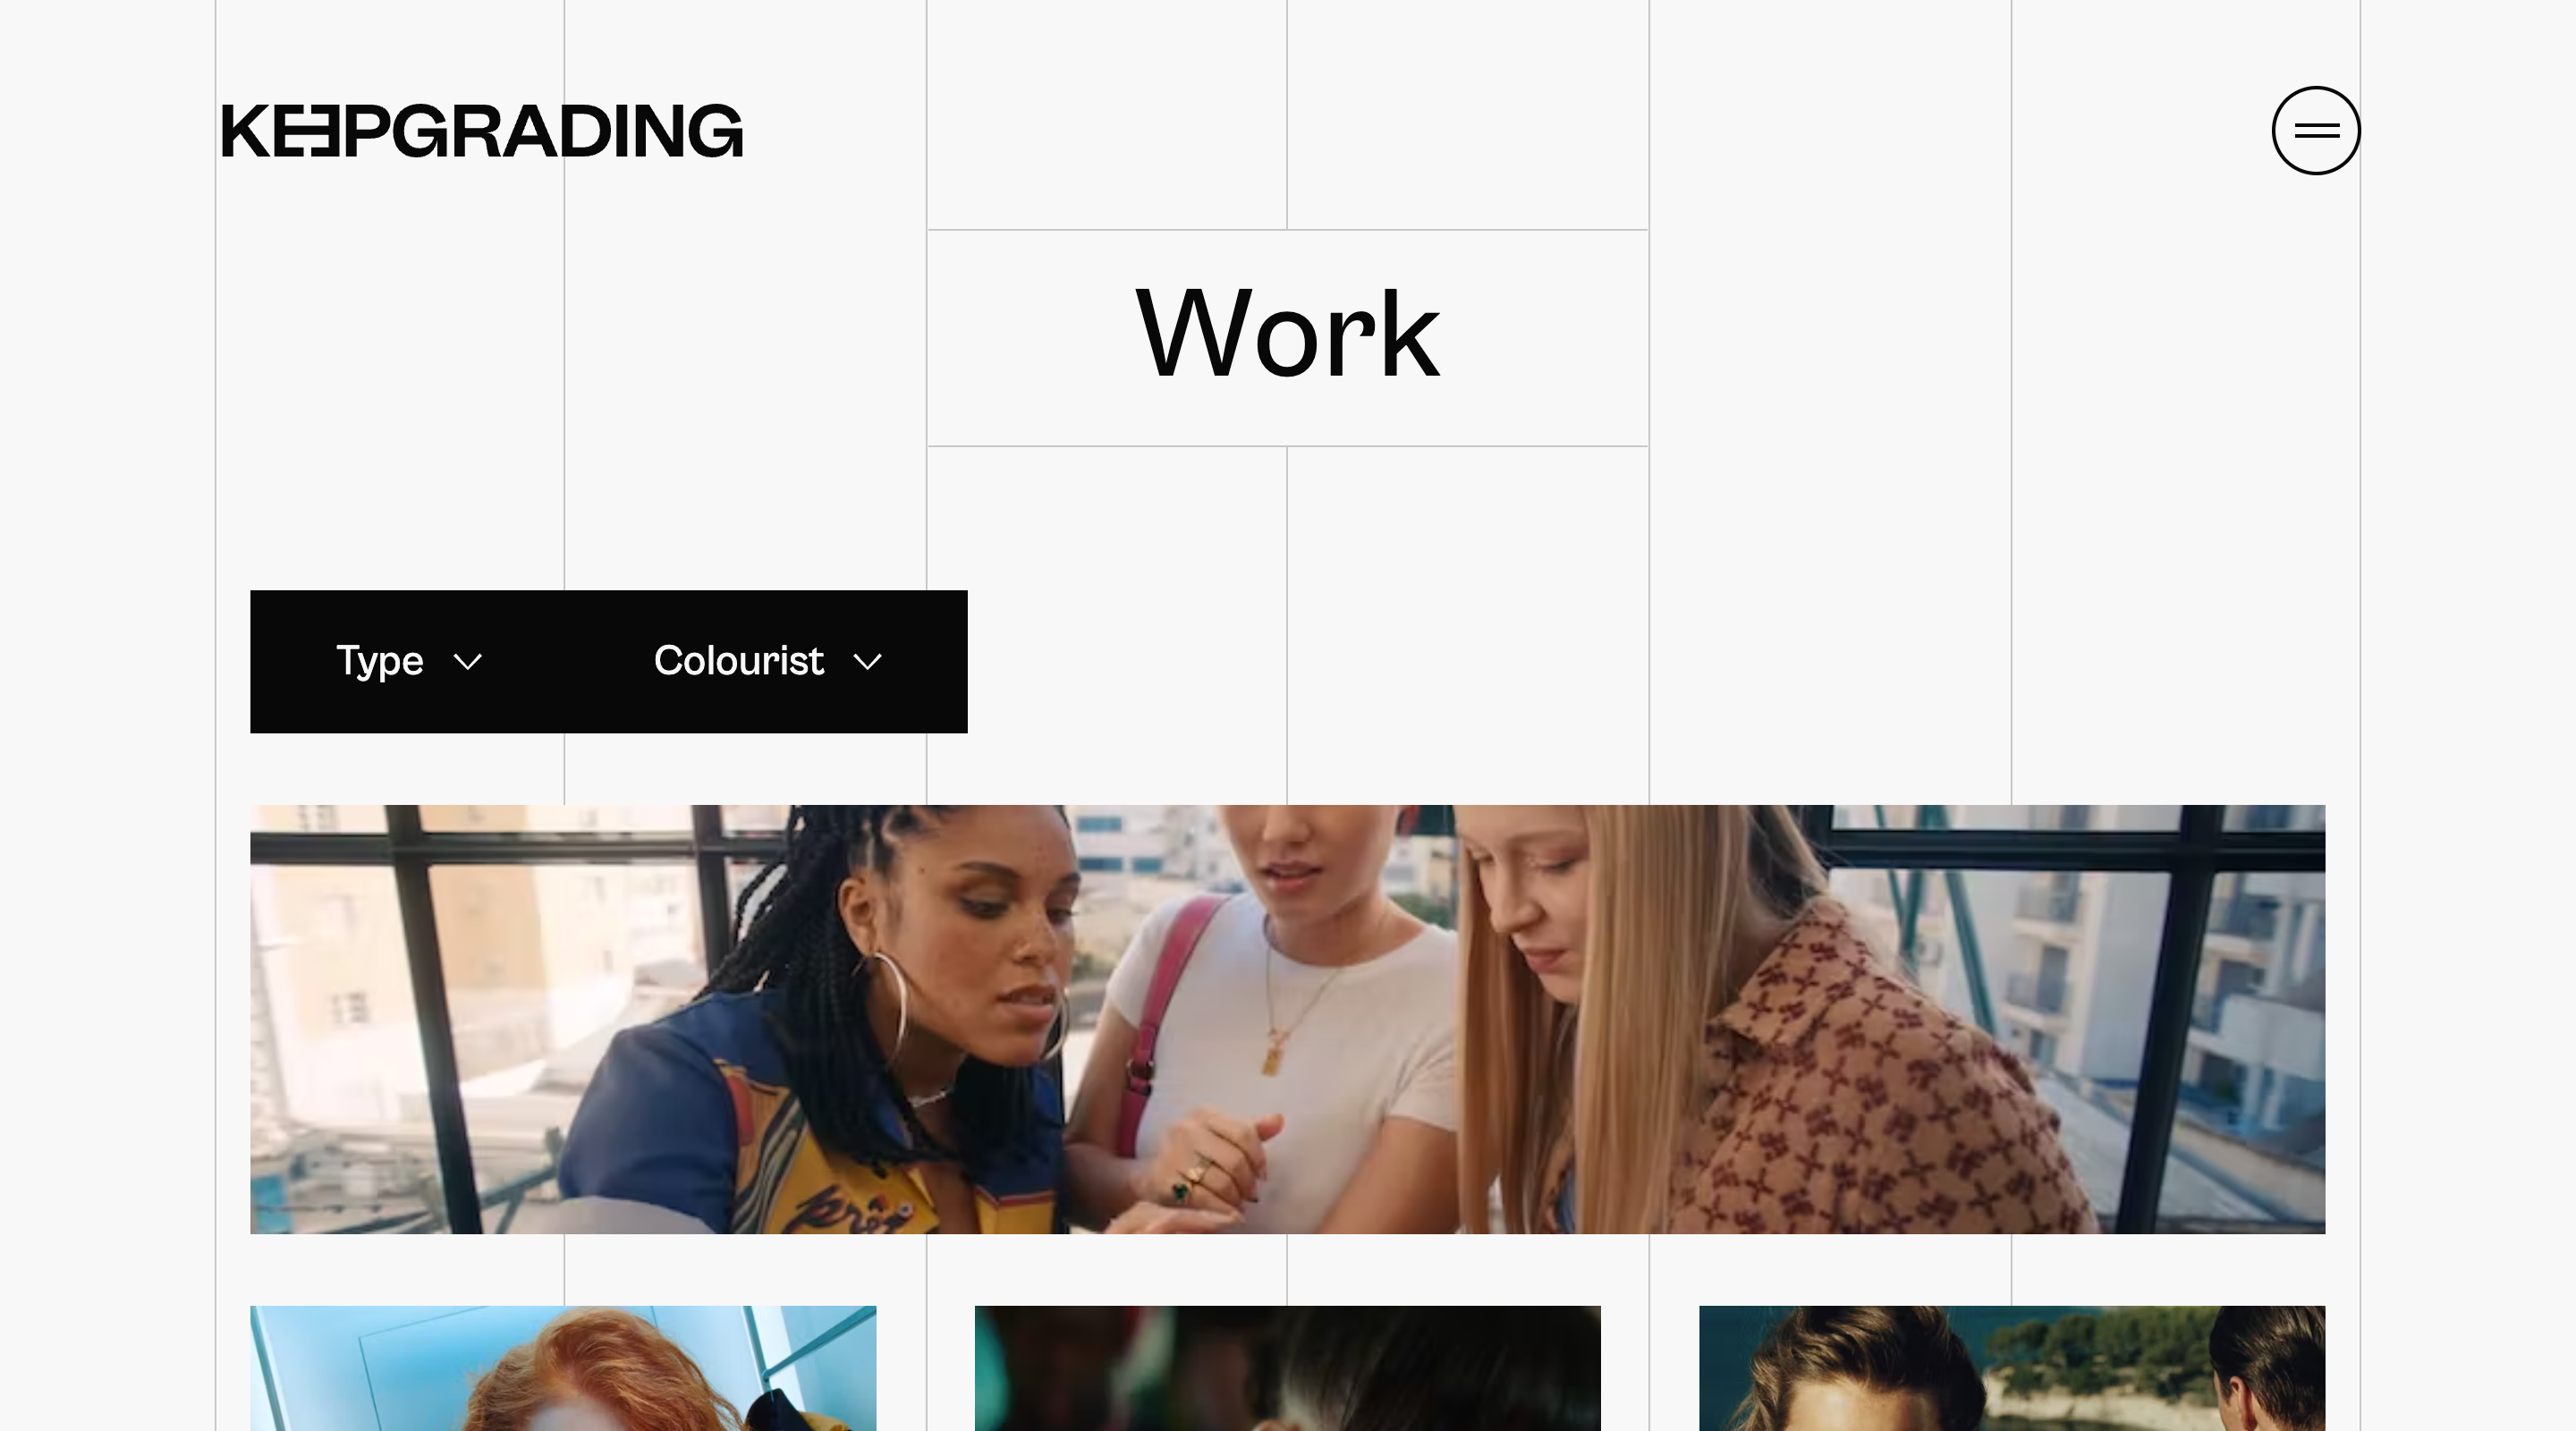 Screenshot of the 'Work' page on the KeepGrading website. At the top of the screen is the KeepGrading logo, a menu button, and the 'Work' page heading. There are two dropdowns labelled 'Type' and 'Colourist', followed by a grid of images.